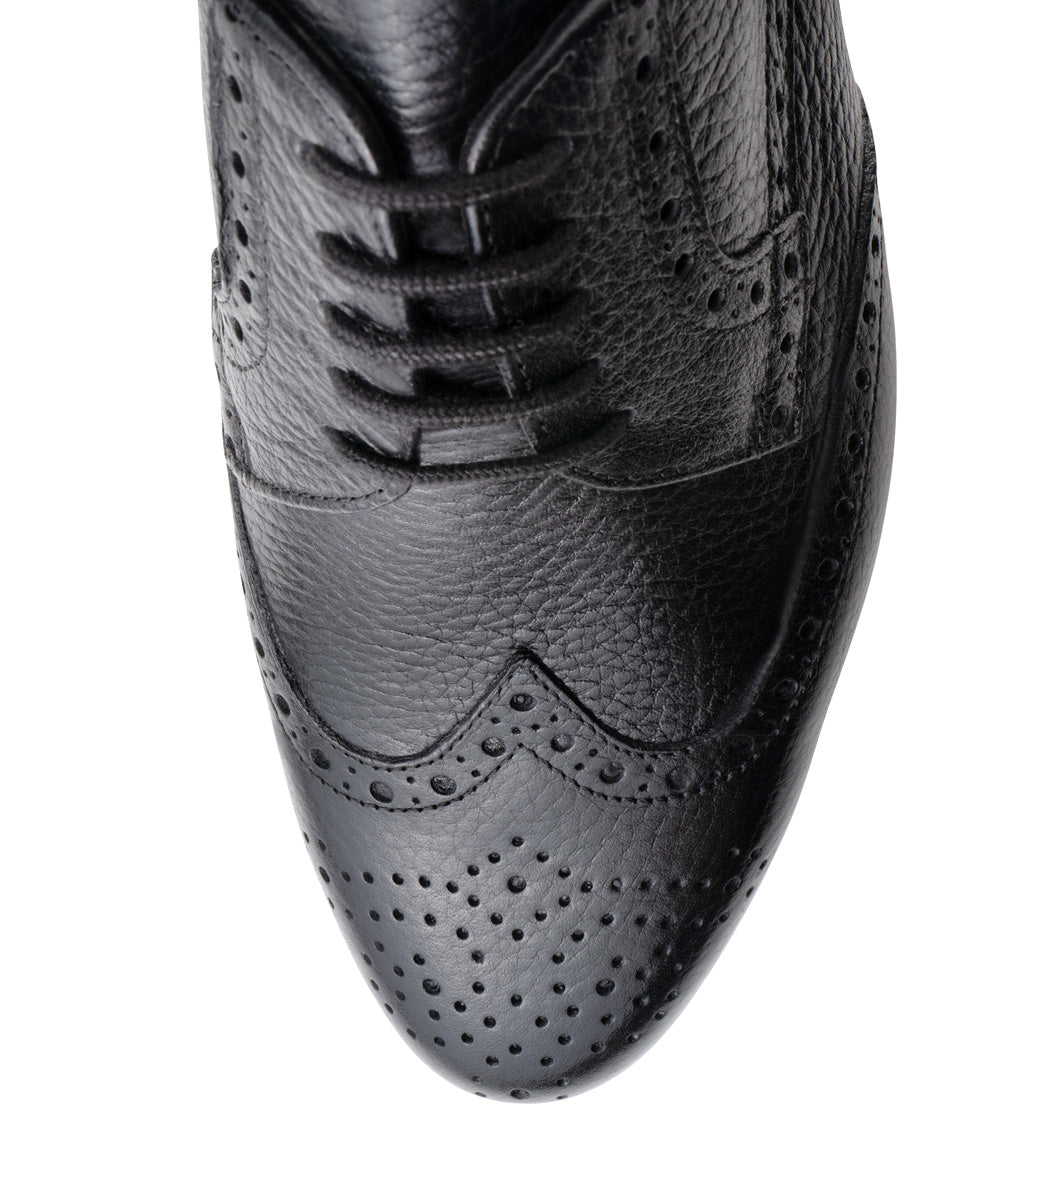 Werner Kern Bormio Men's Black Nappa Leather Ballroom Dance Shoe with Perforated Wing Cap and Extra Wide Fit